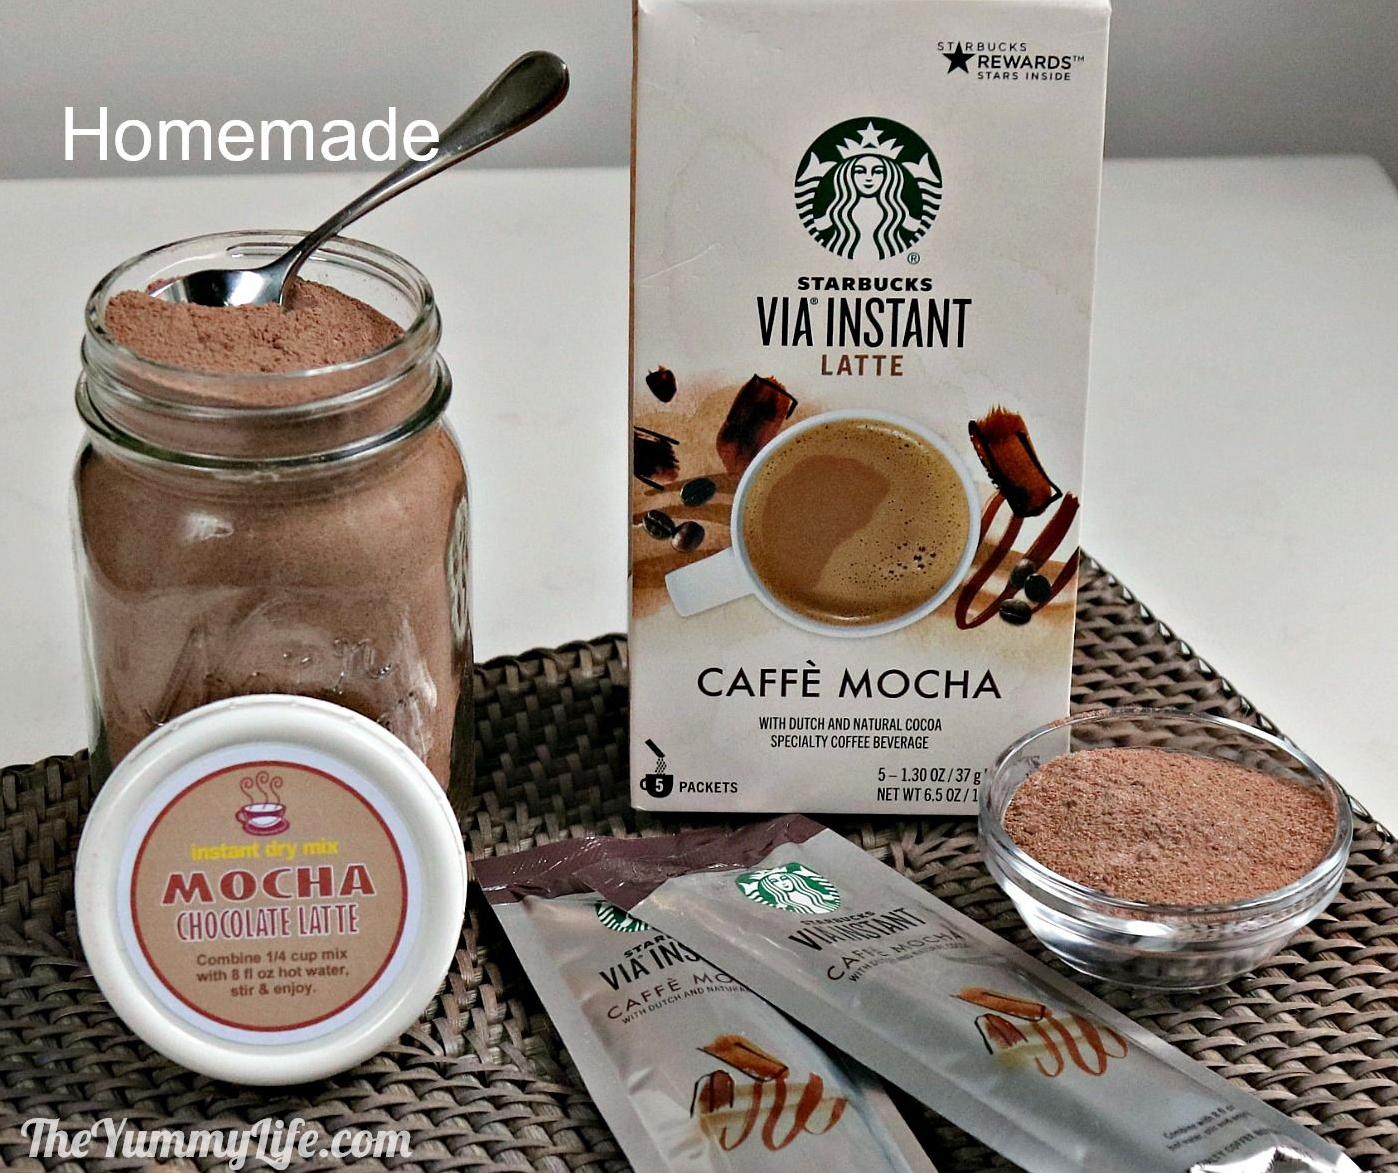  Can you smell the chocolatey goodness of our Cafe Mocha Mix?